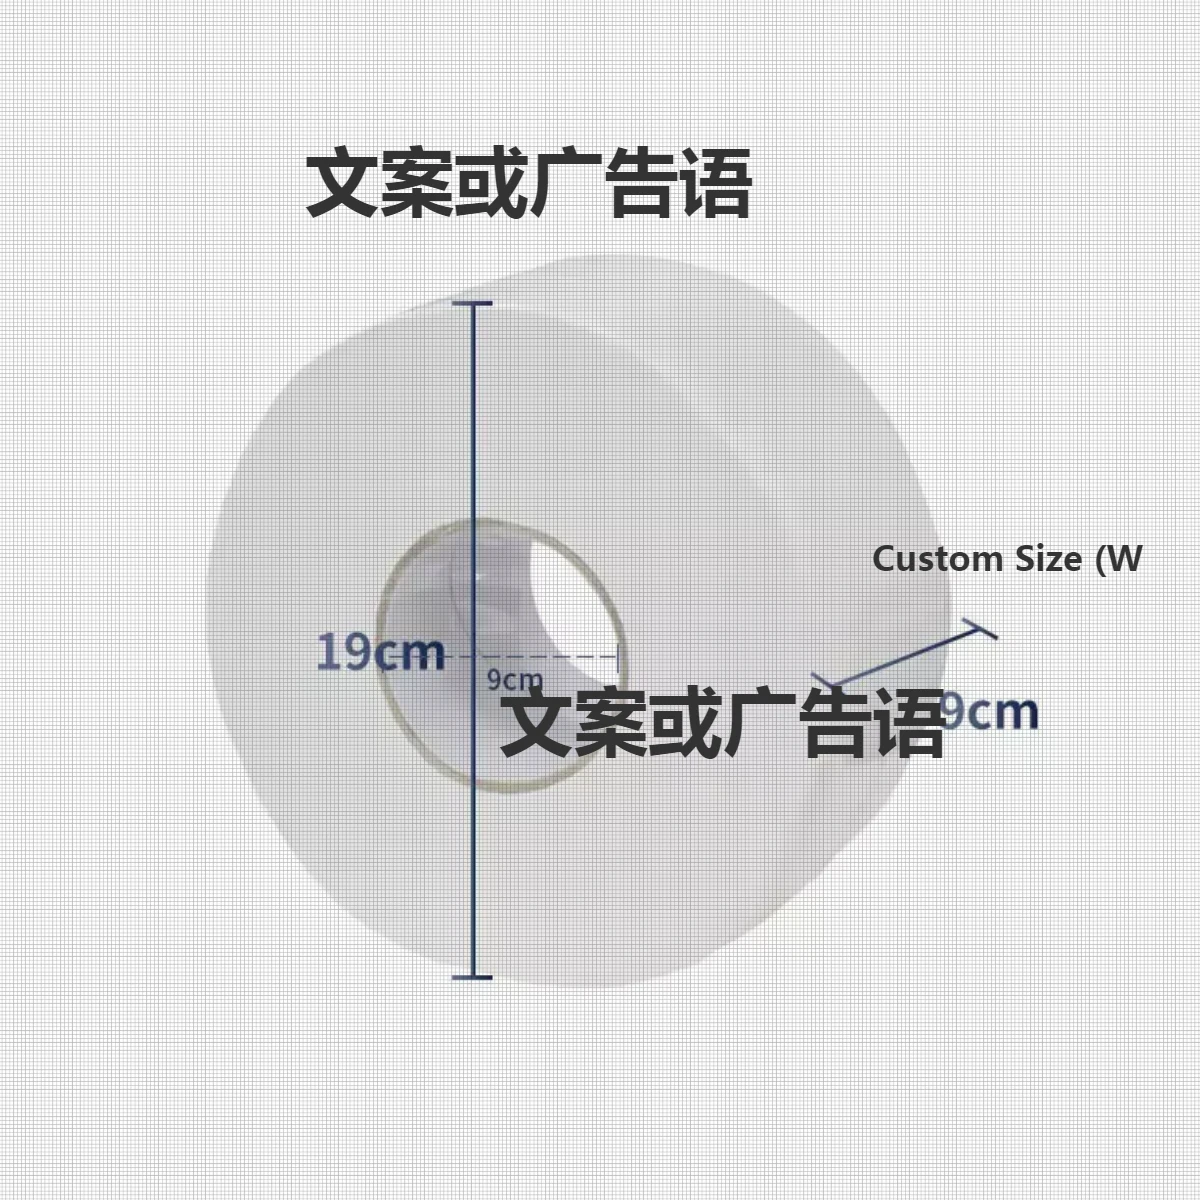 Salable Printed OEM Toilet Tissue Jumbo Roll Support The Distribution Agent In Stock